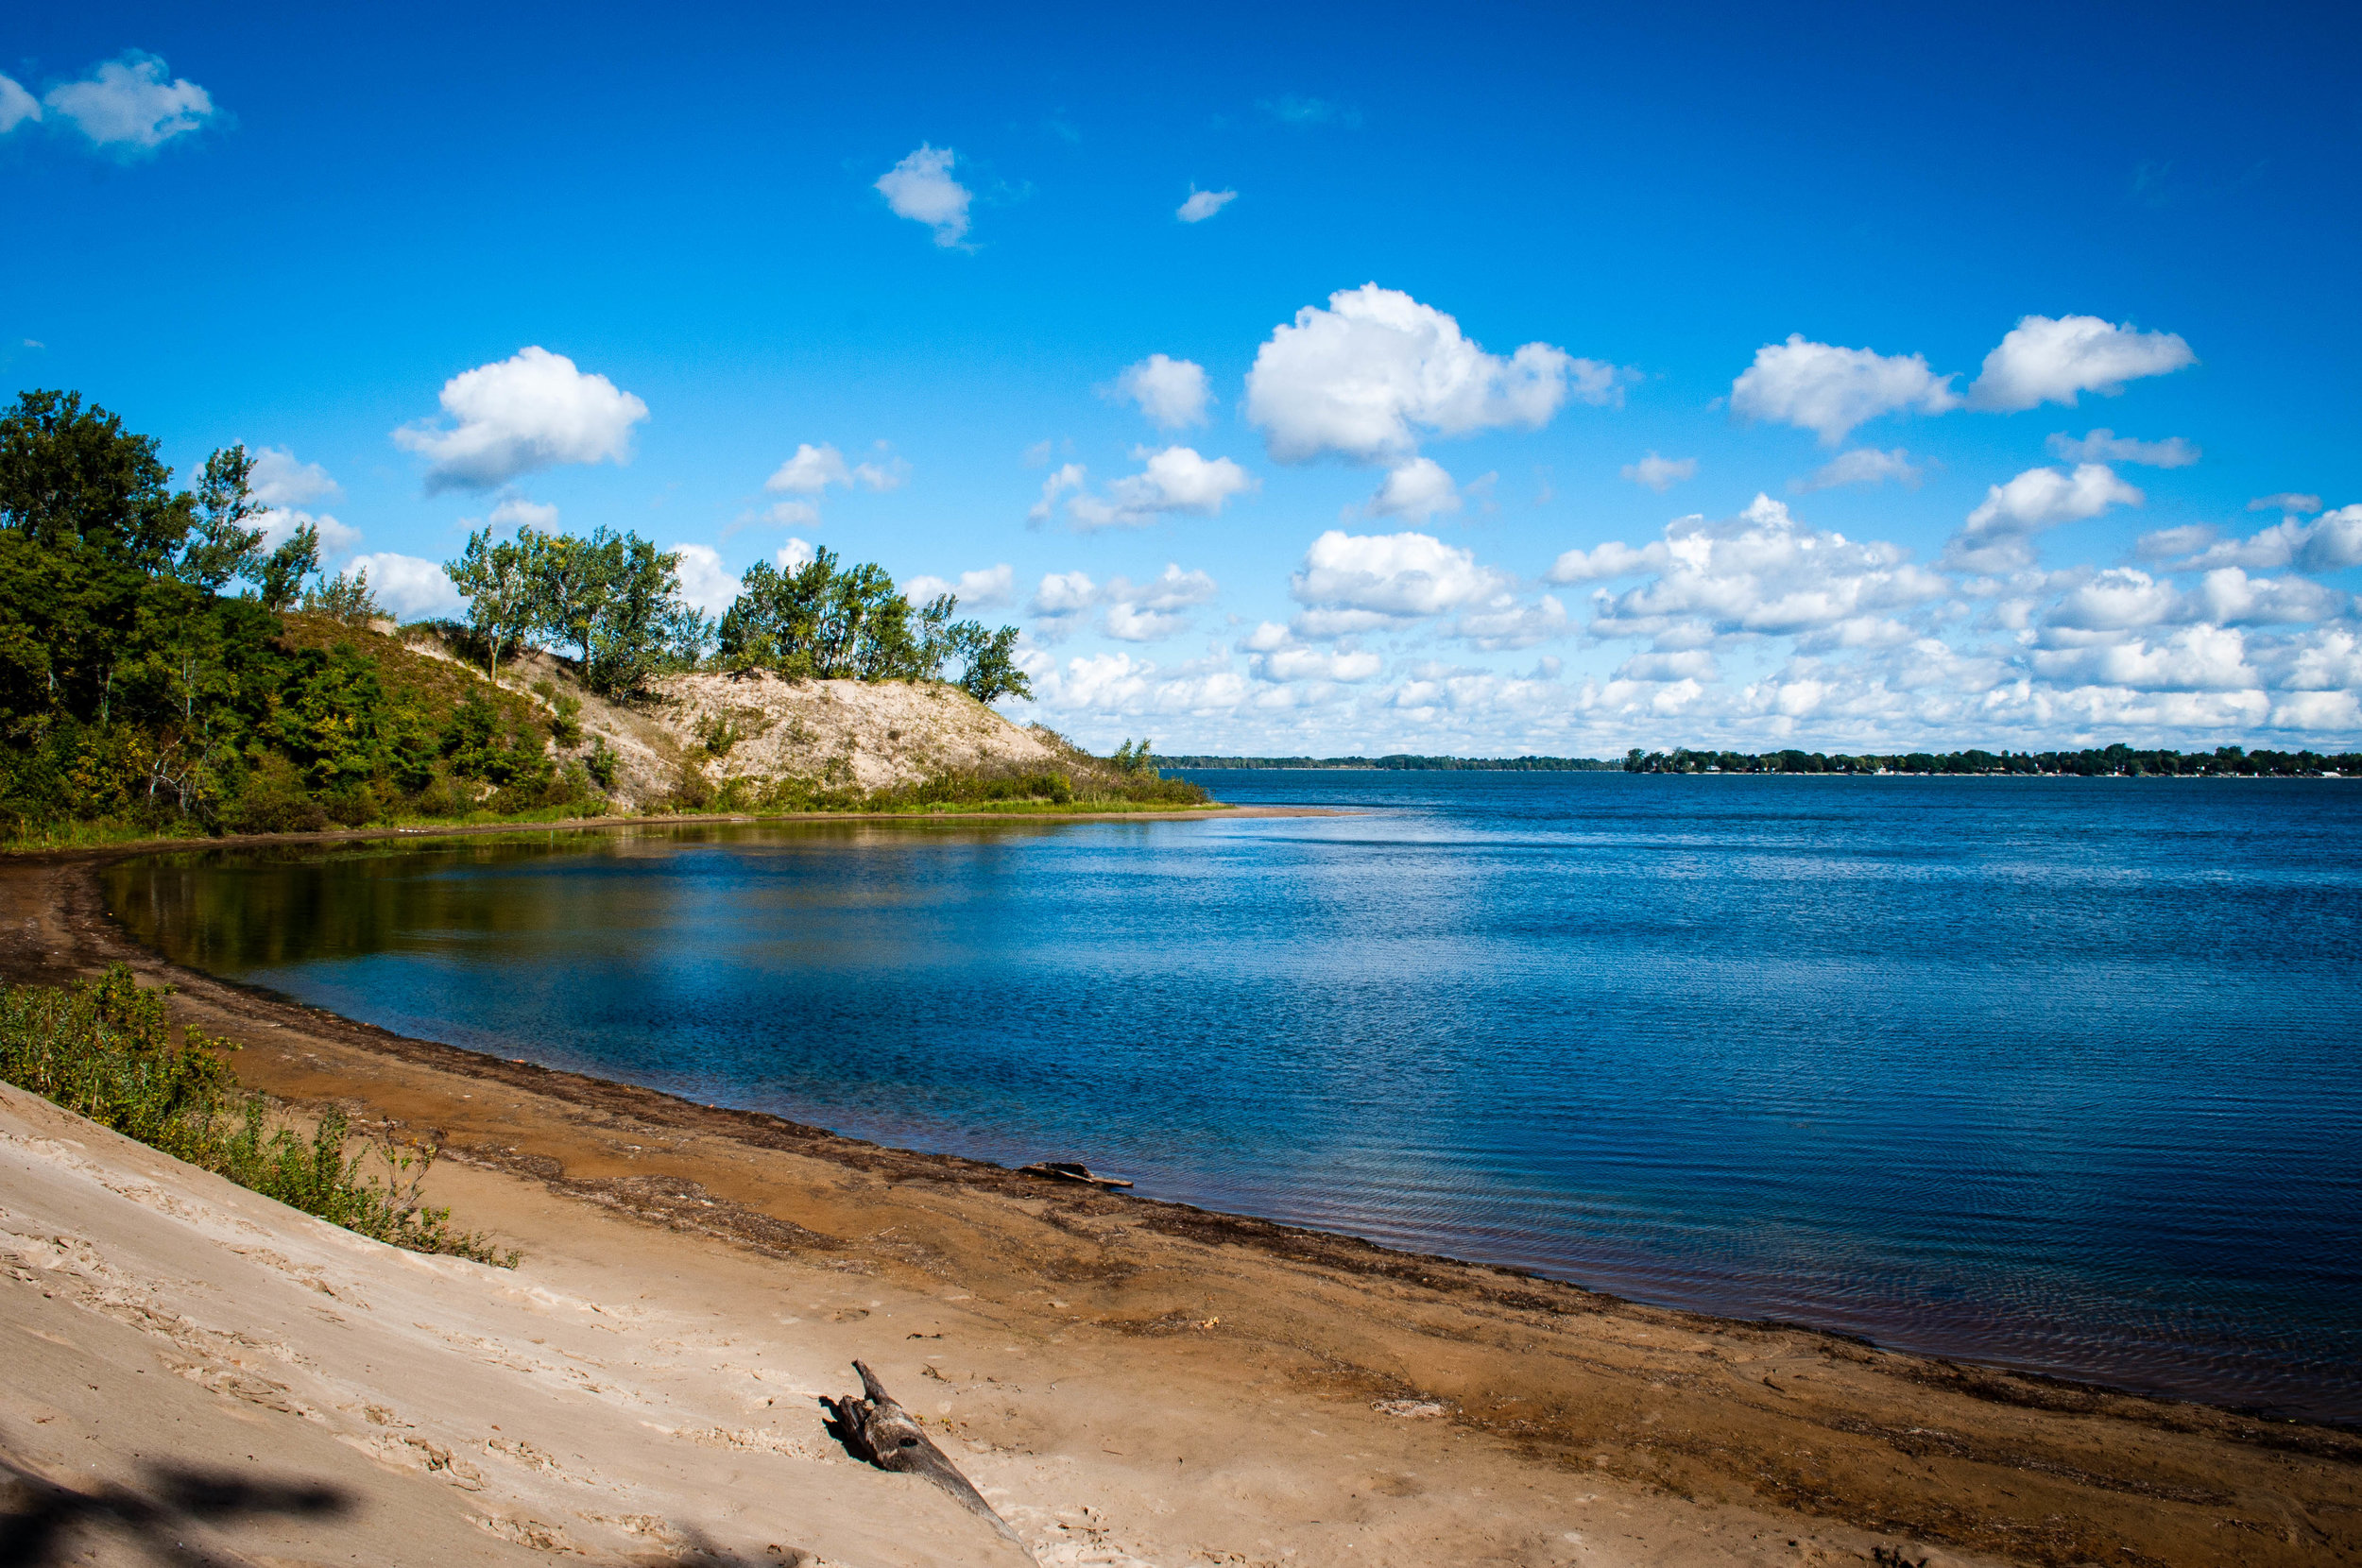 Sandbanks provincial park - Things to do in Prince Edward County